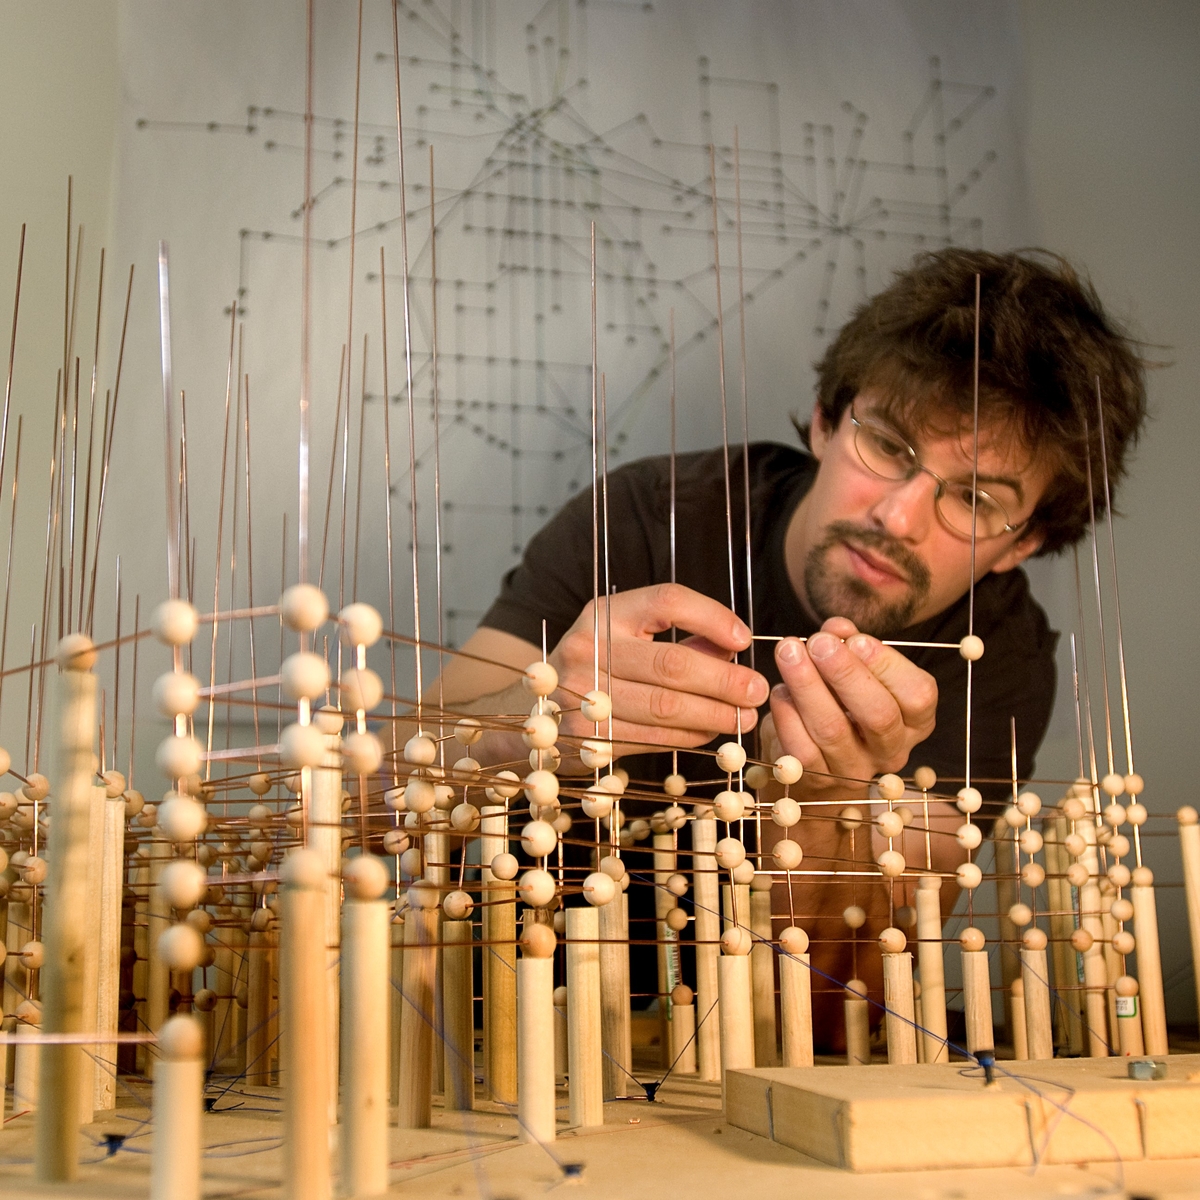 A student with brown hair, beard, and glasses looks intently at a complex wood and wire structure. The structure is made of vertical copper wires, small wooden balls, and short wooden dowels. 